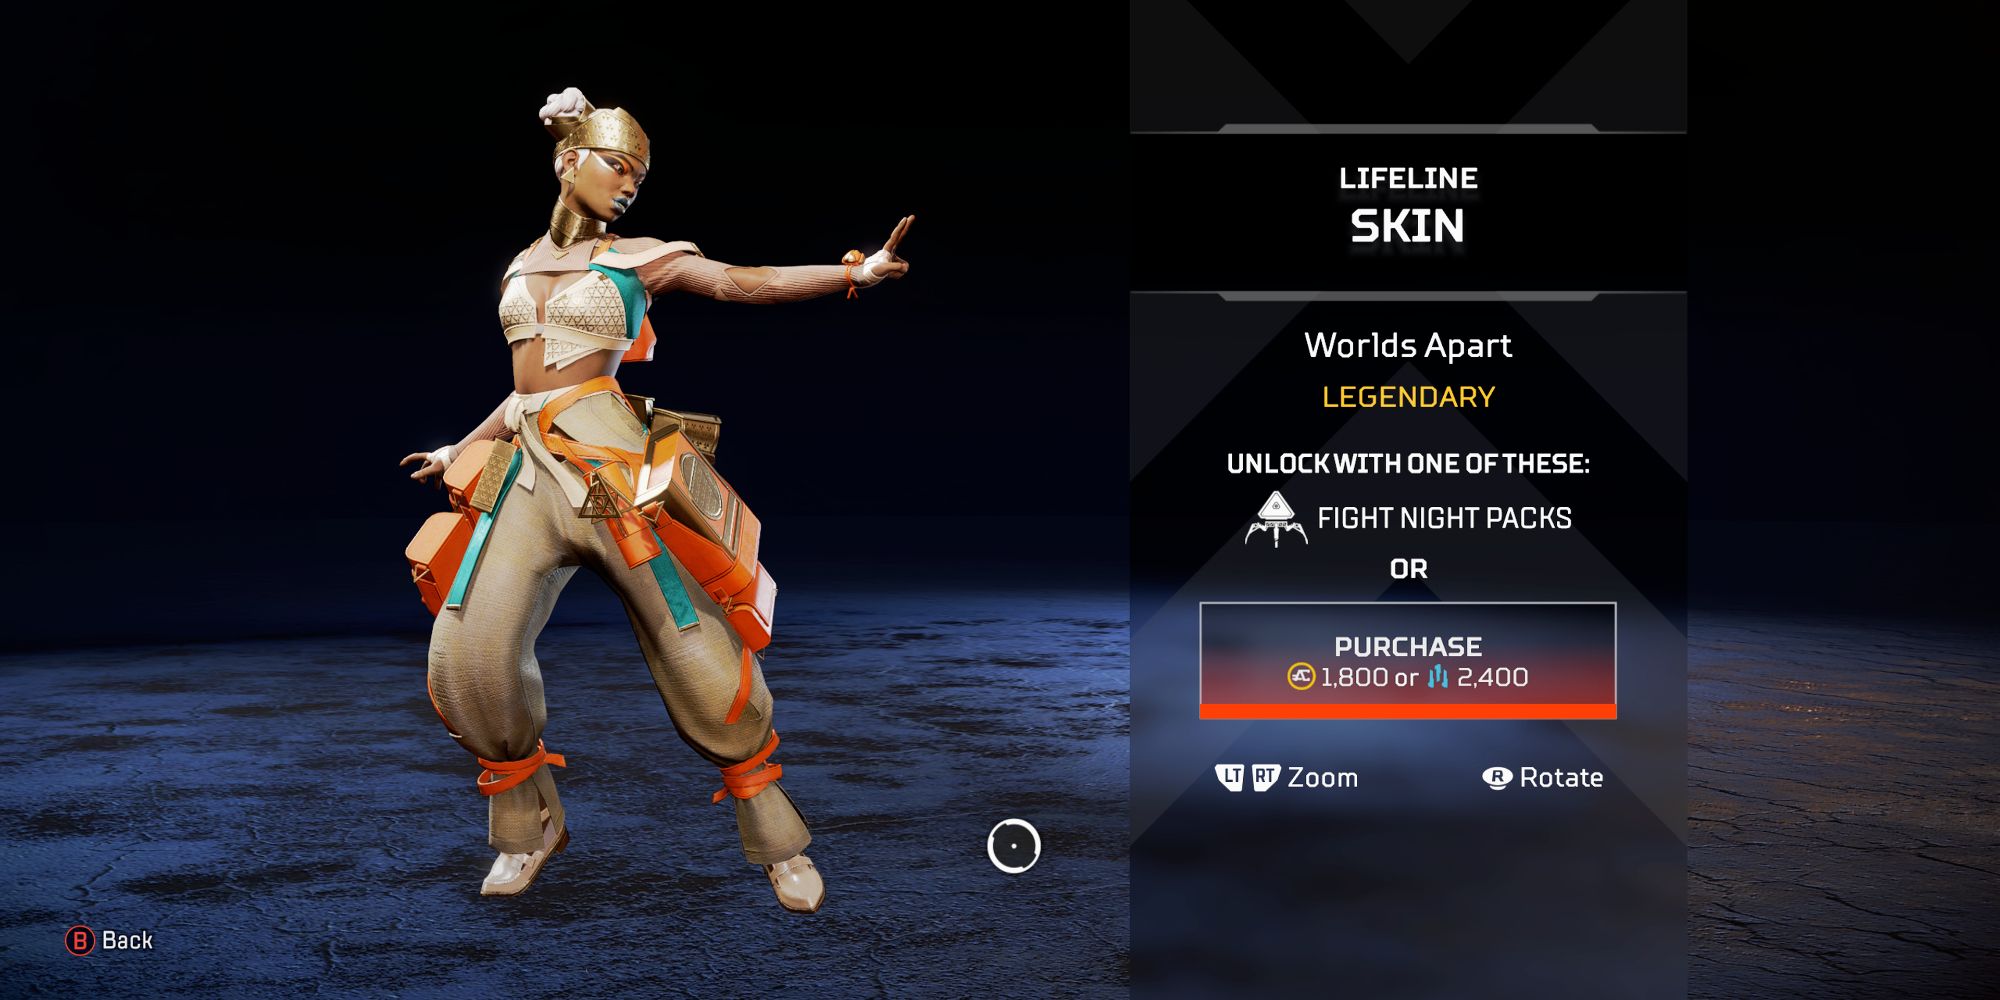 An image of Lifeline's Worlds Apart skin from Apex Legends